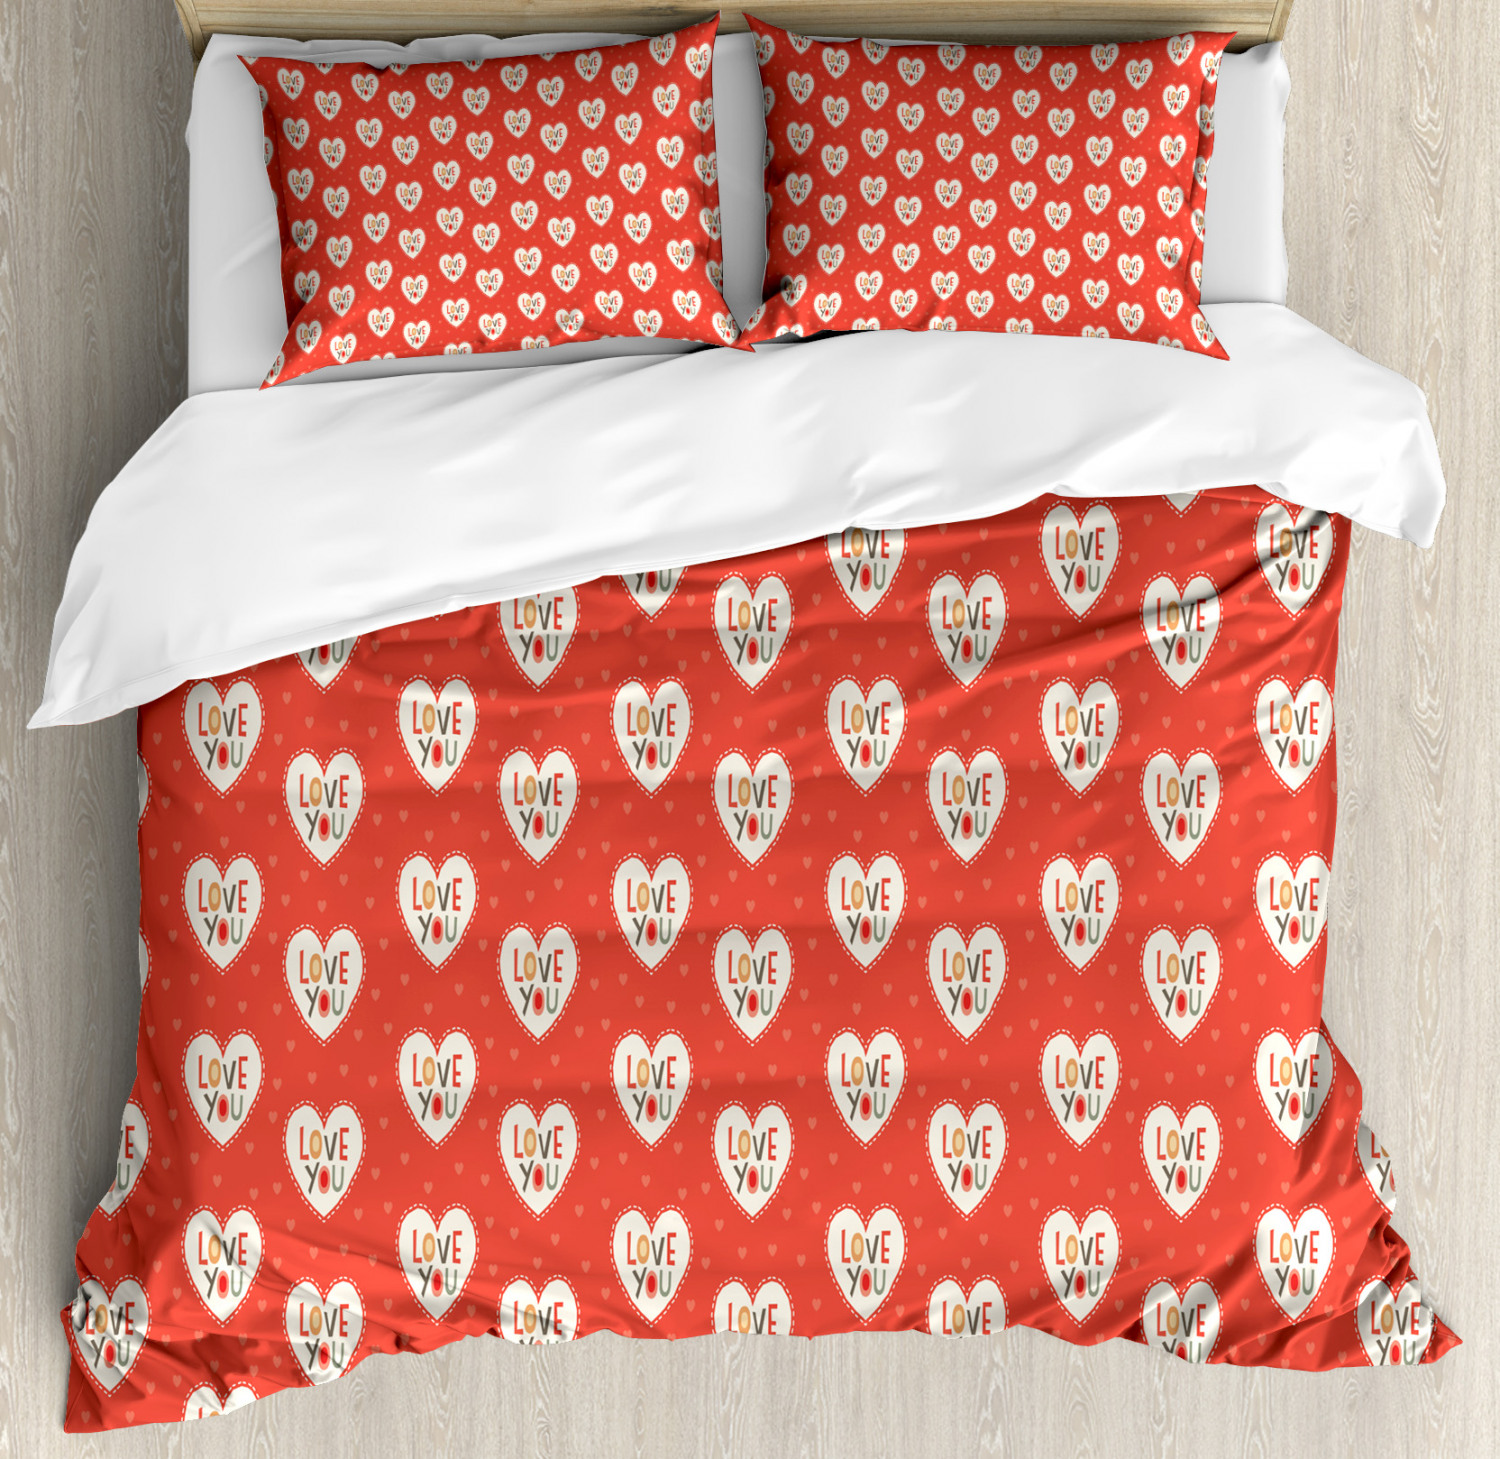 Love Duvet Cover Set With Pillow Shams Hipster Hearts Valentines